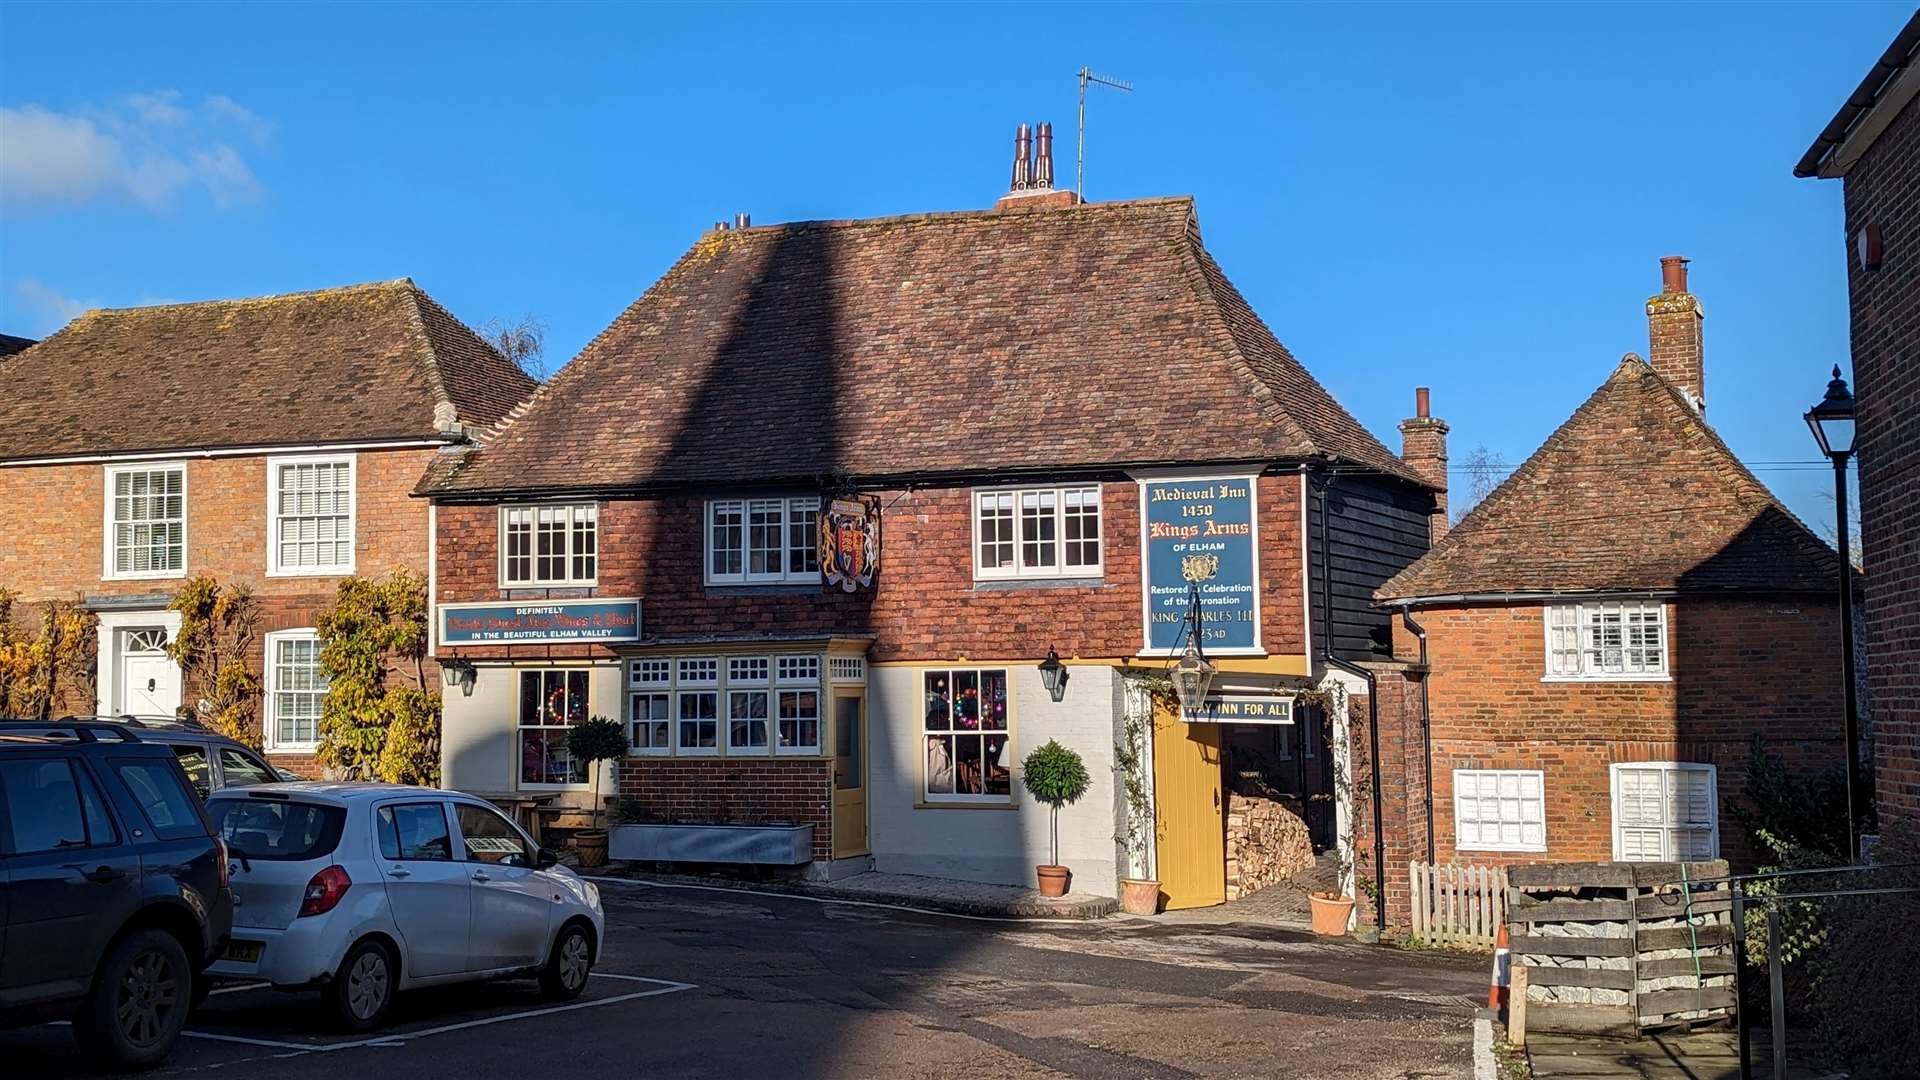 The Kings Arms in Elham was the destination on our walk through the local countryside